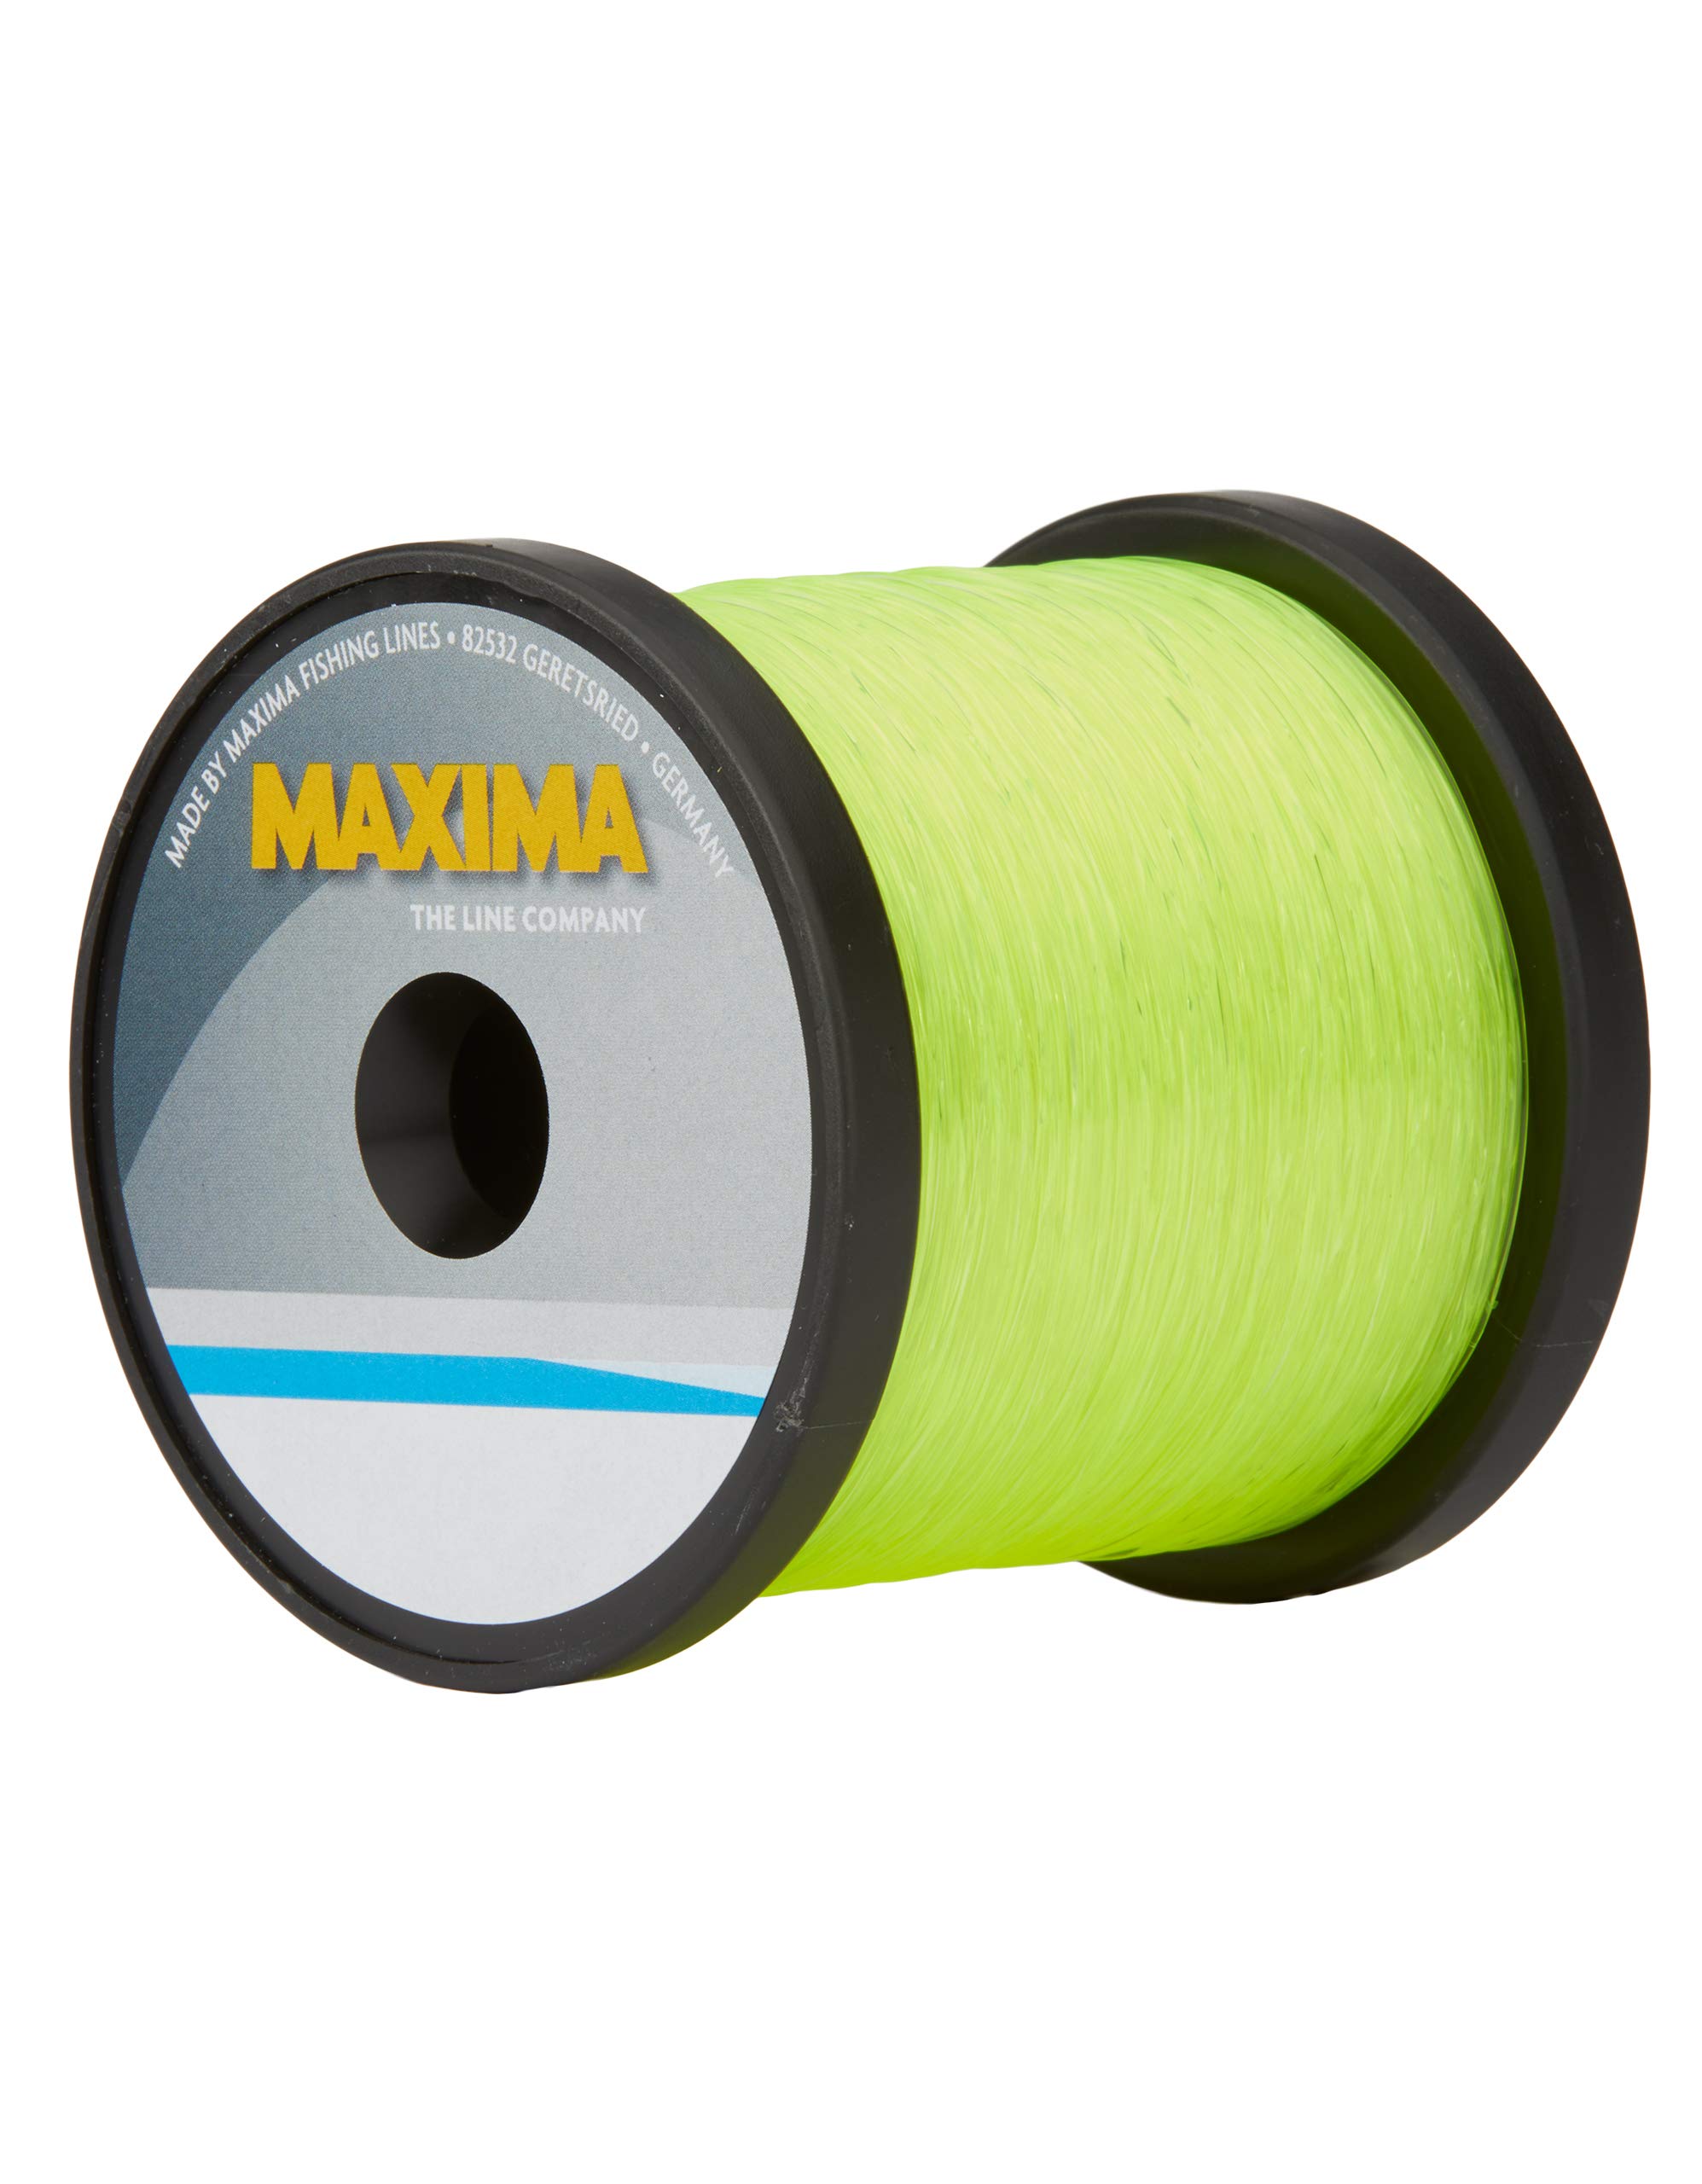 Maxima Fishing Line Guide Spools, High Visibility Yellow 8-pound/600-yard